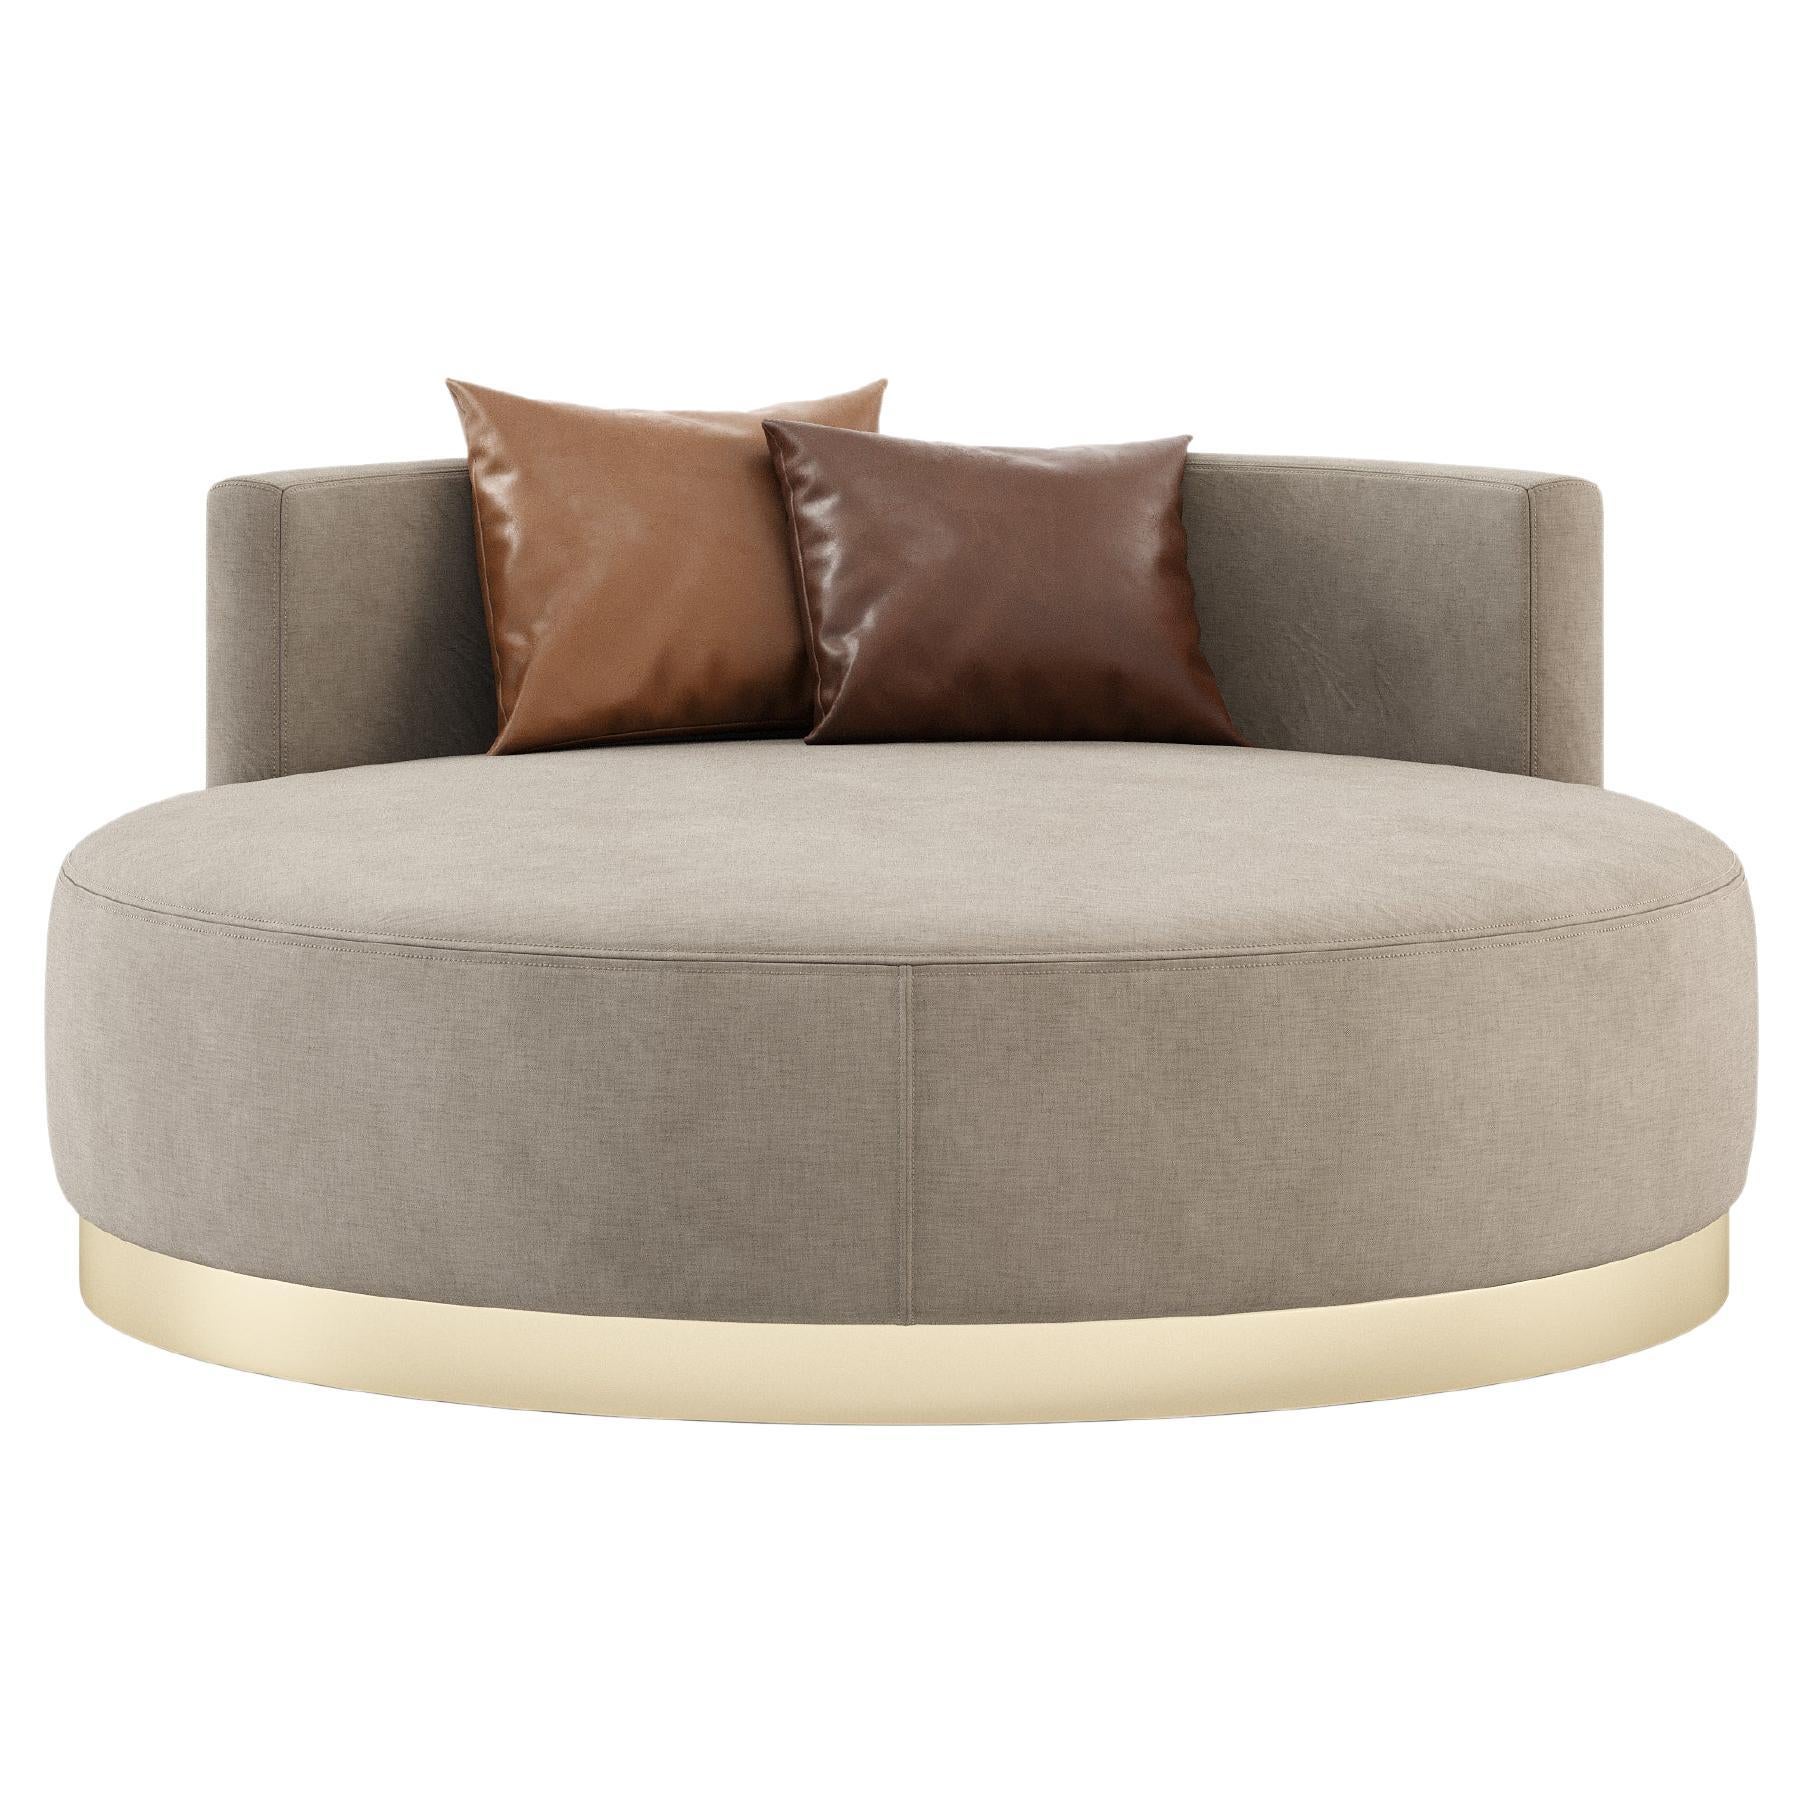 Upholstered round chaise lounge with custom fabric by Laskasas For Sale